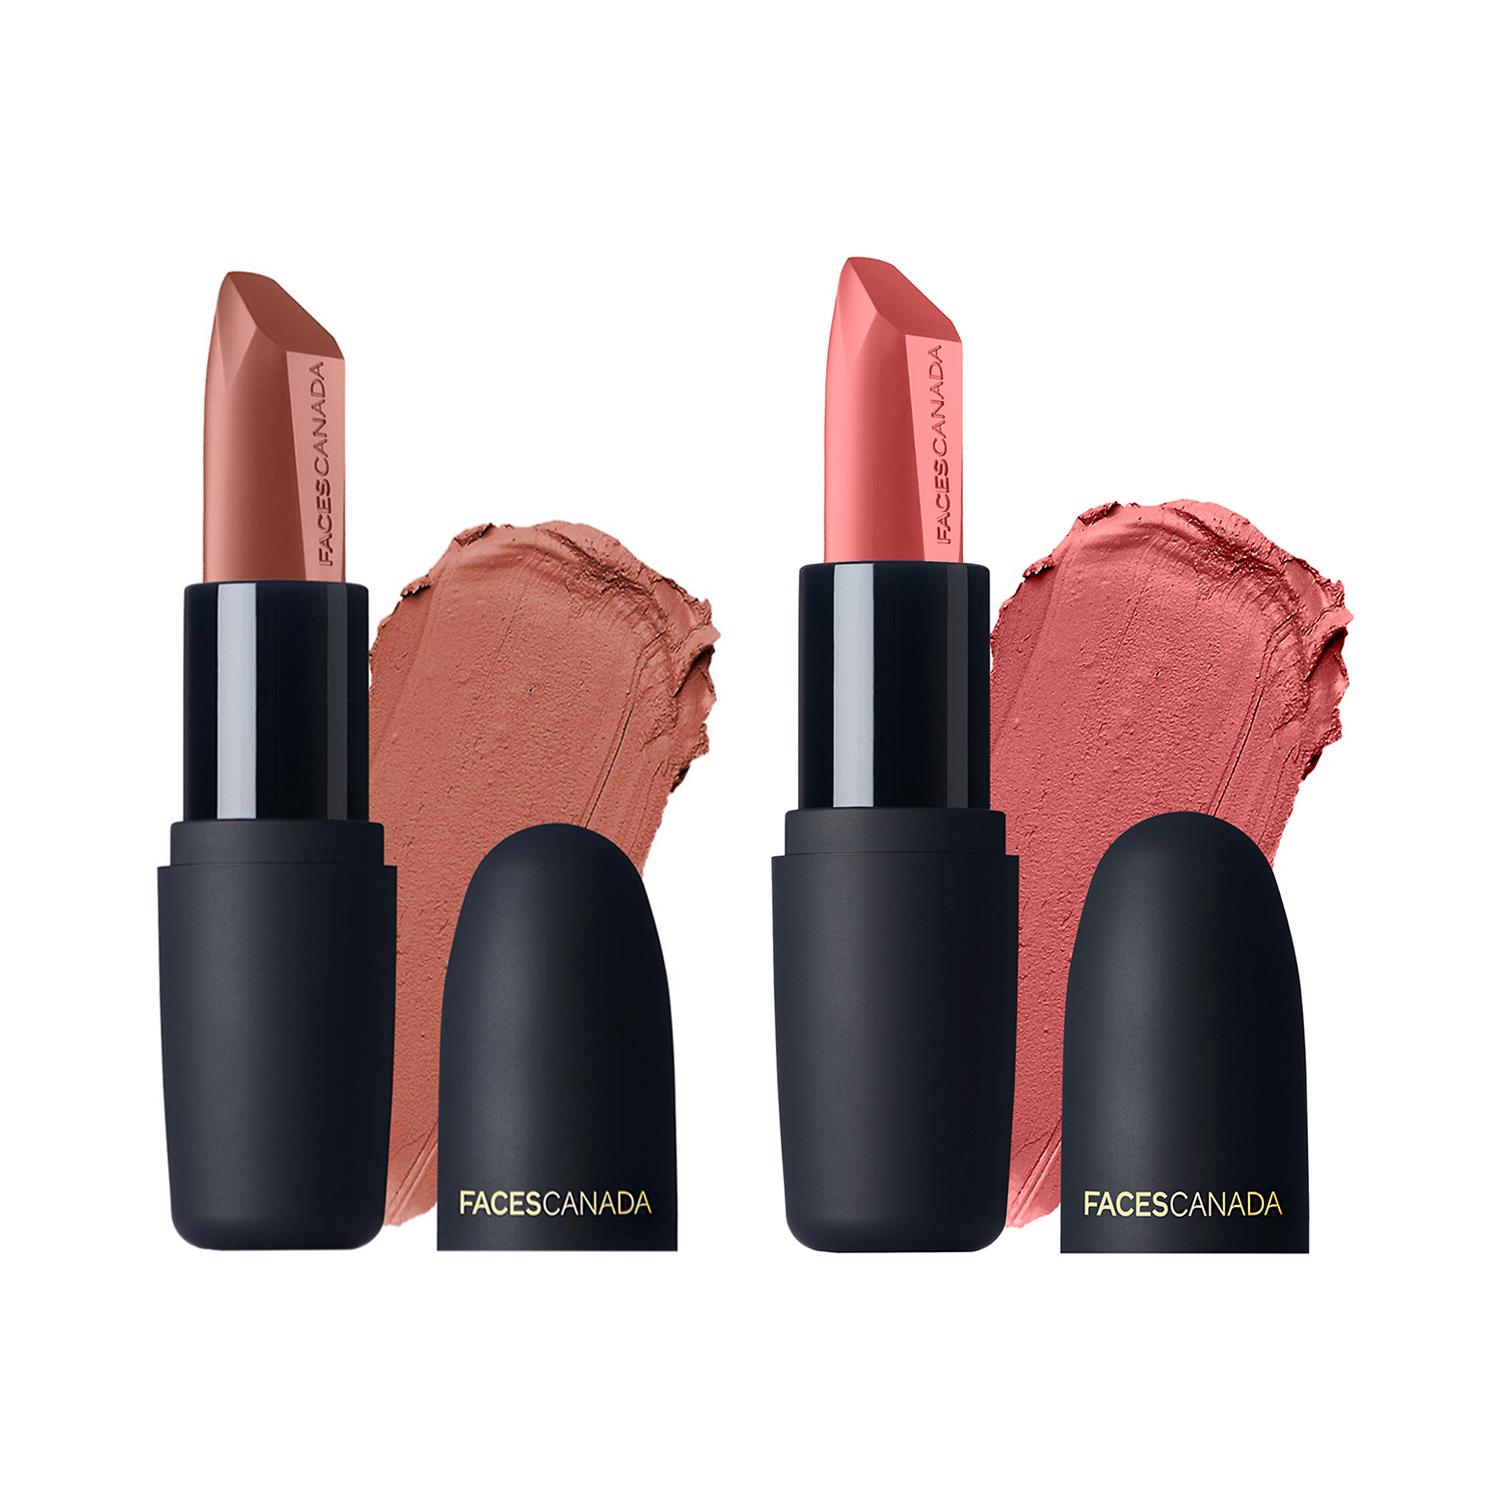 Faces Canada | Faces Canada Festive Glam - Weightless Matte Lipstick Pack of 2 - Buff Nude & Peach Candy